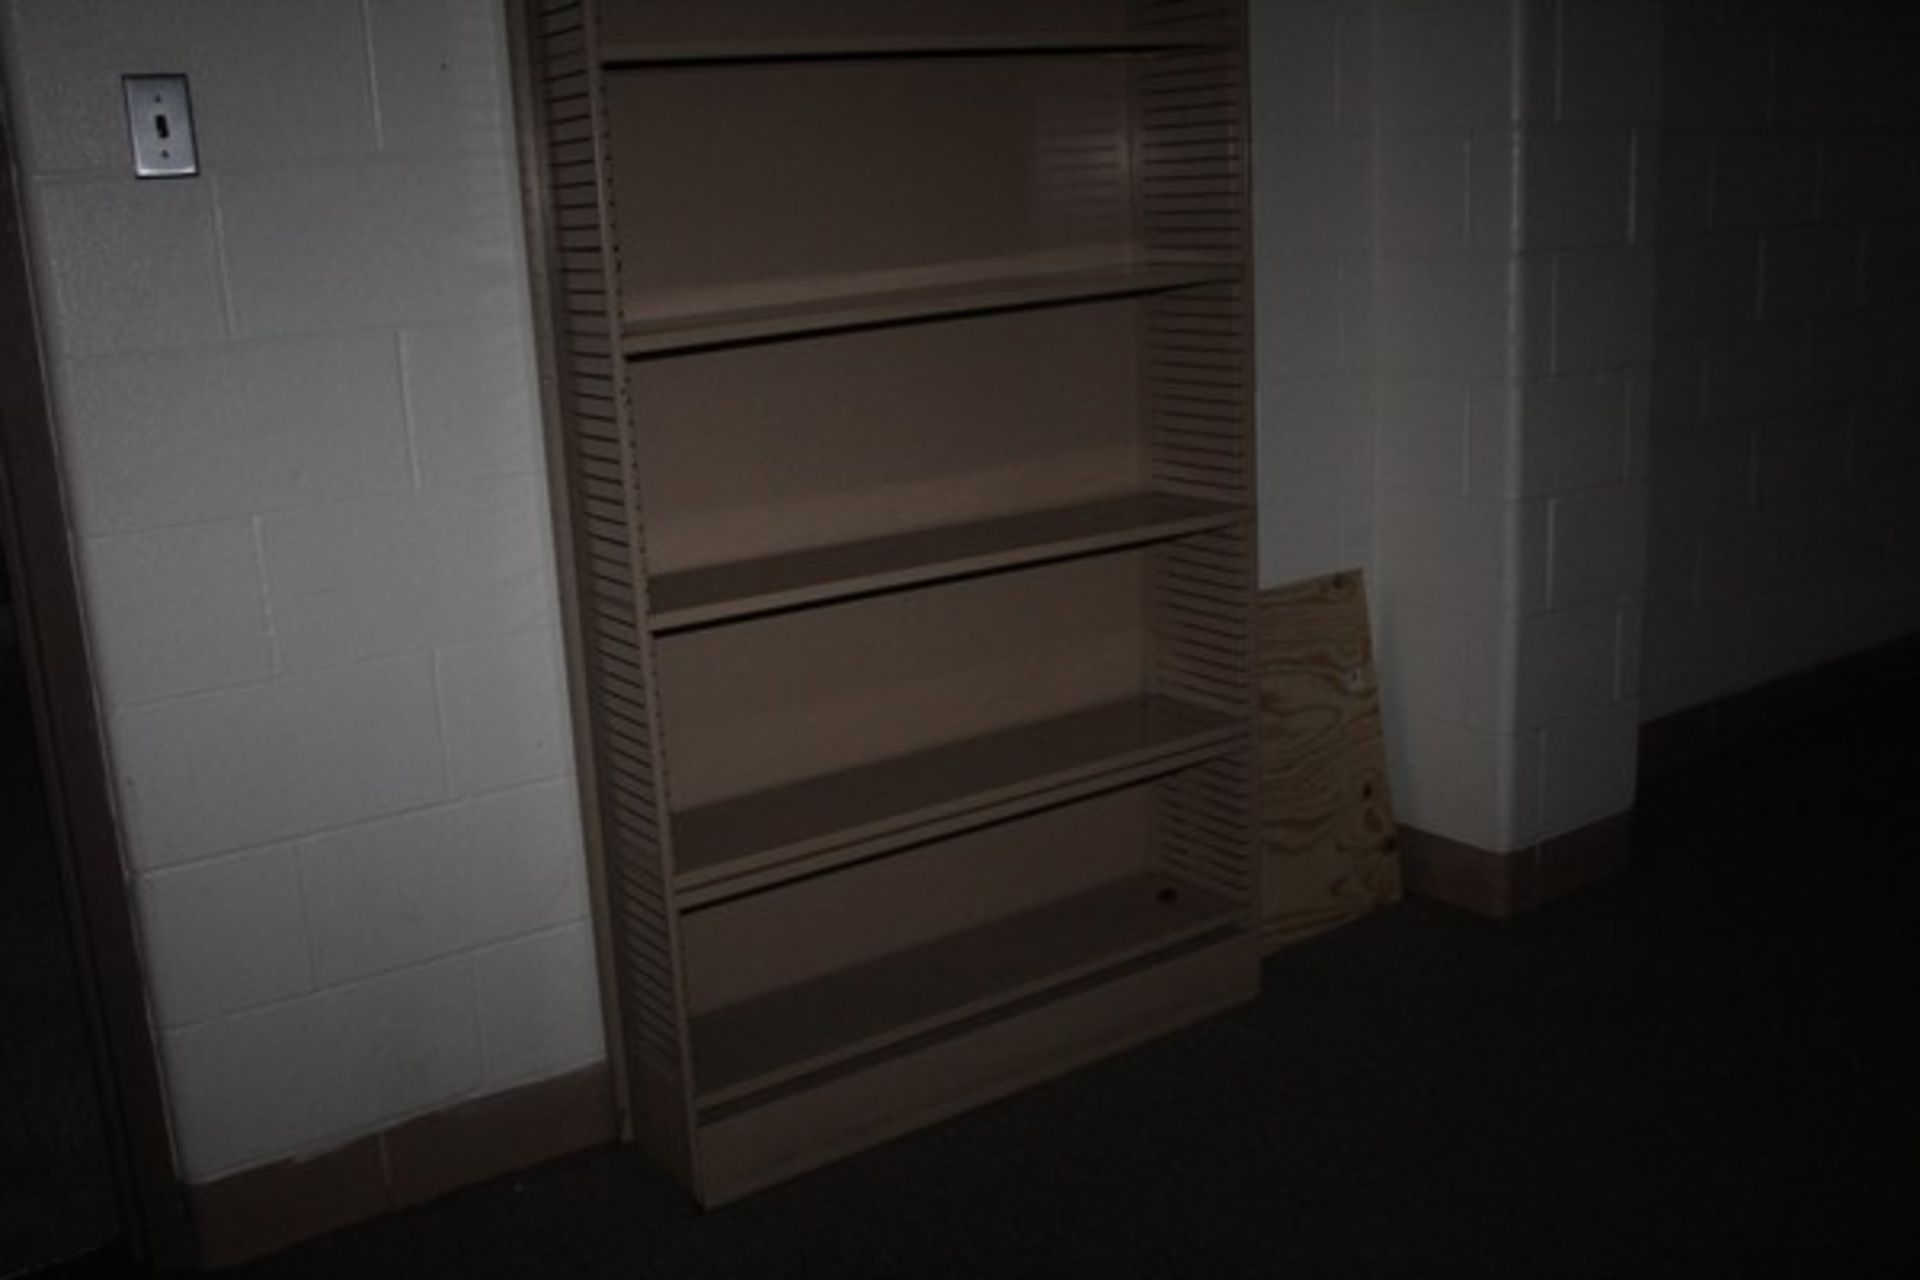 CONTENTS OF FOUR ROOMS, WALL HEATERS, CABINETS, DOORS, MISC. (BUYER HAS RIGHT OF ABANDONMENT) - Image 4 of 4